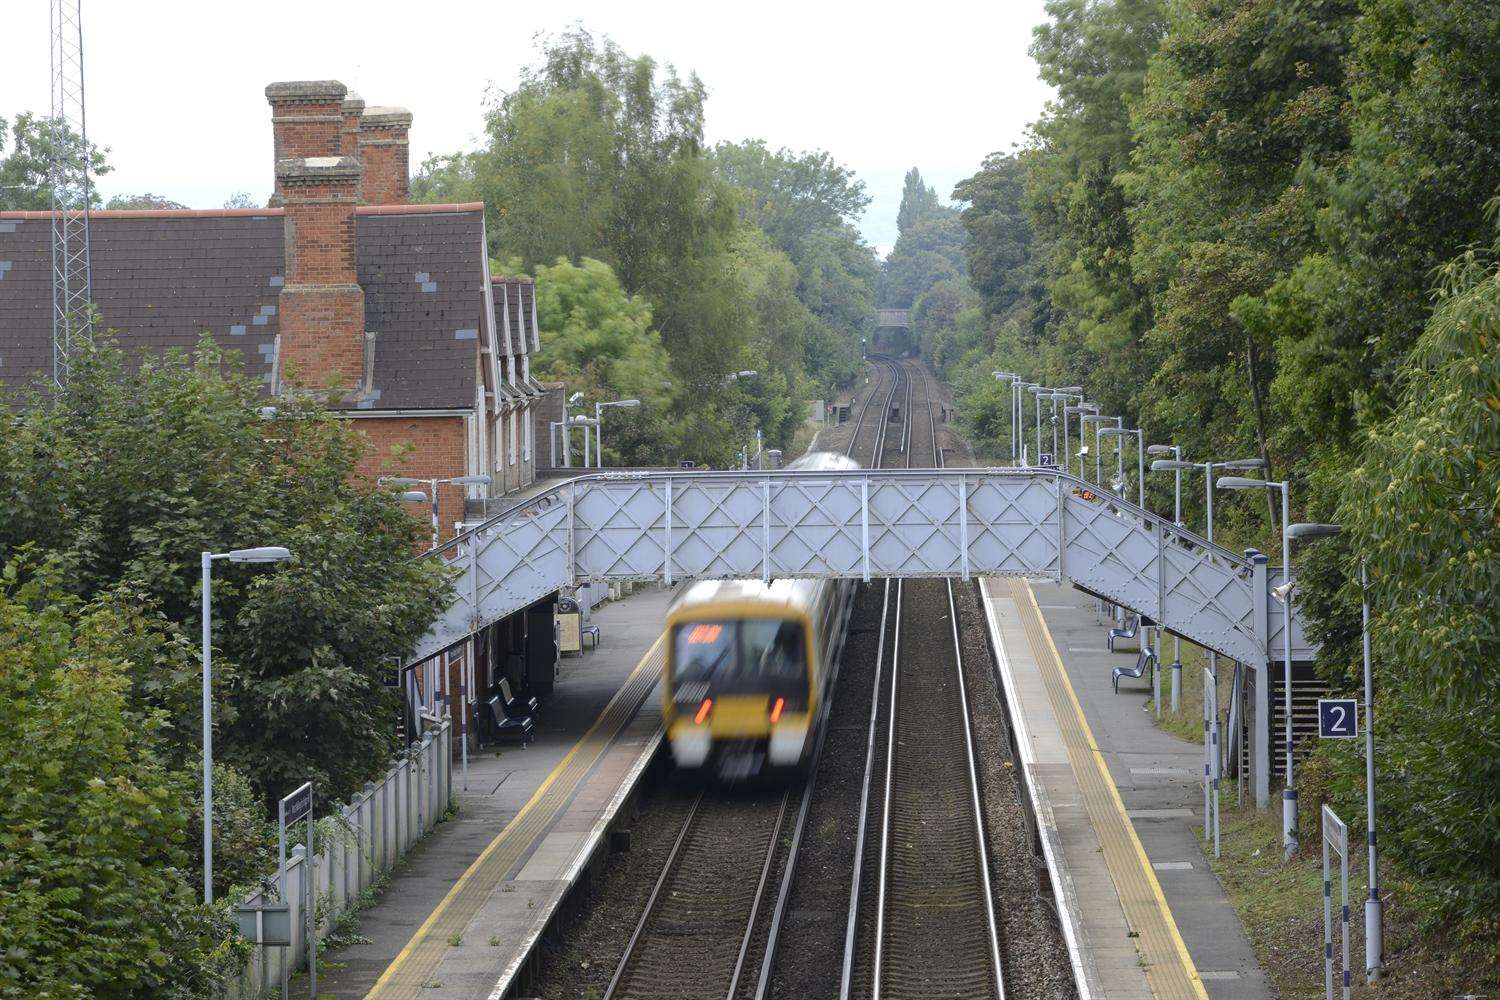 A man was killed by a train at West Malling. Picture: Library image